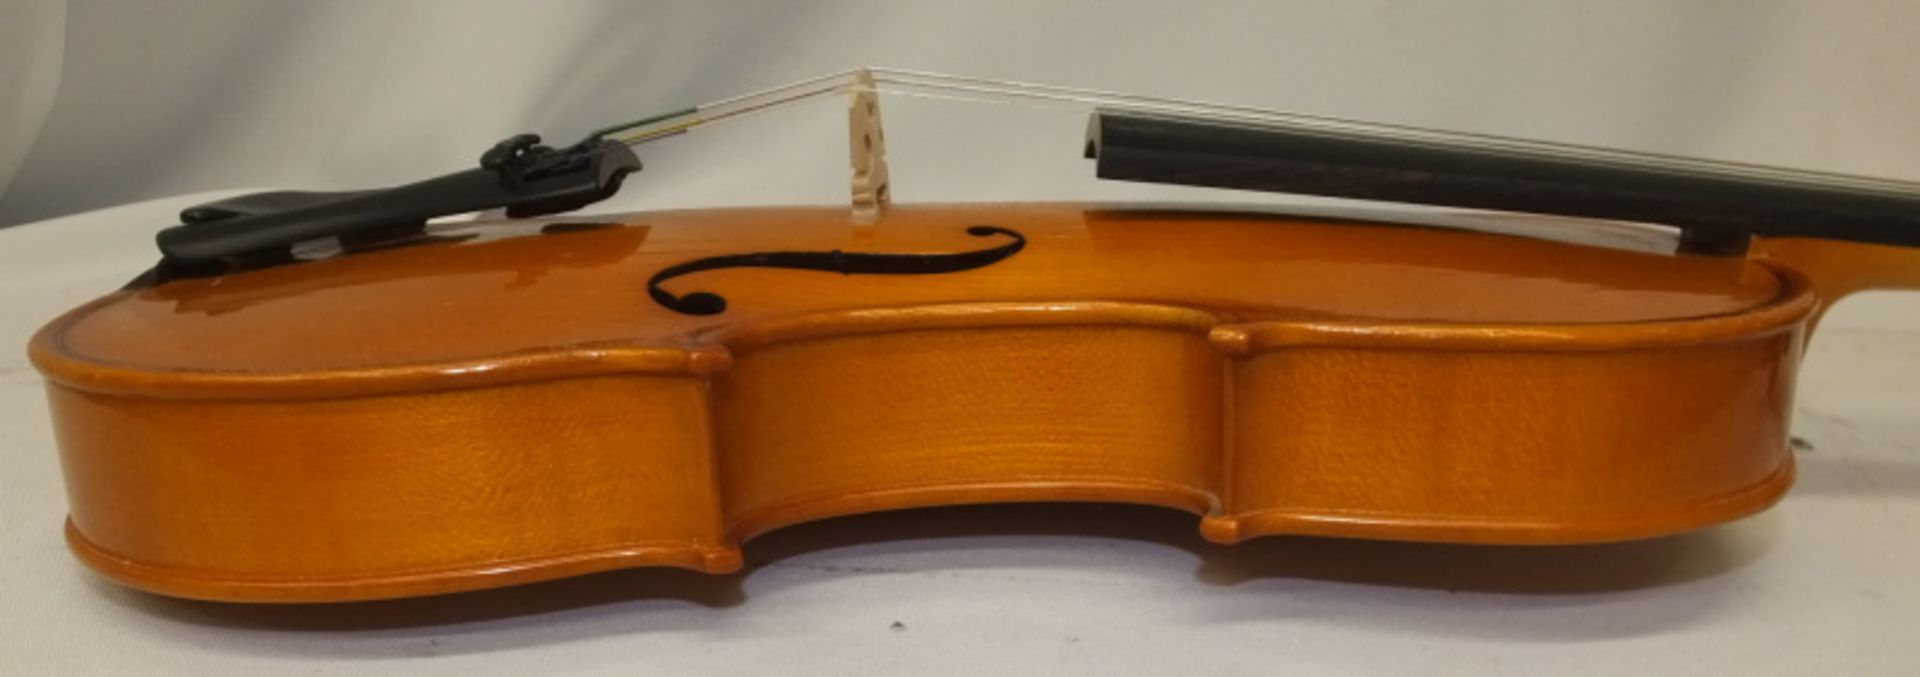 Andreas Zeller Violin (missing string) & Case - Please check photos carefully - Image 10 of 17